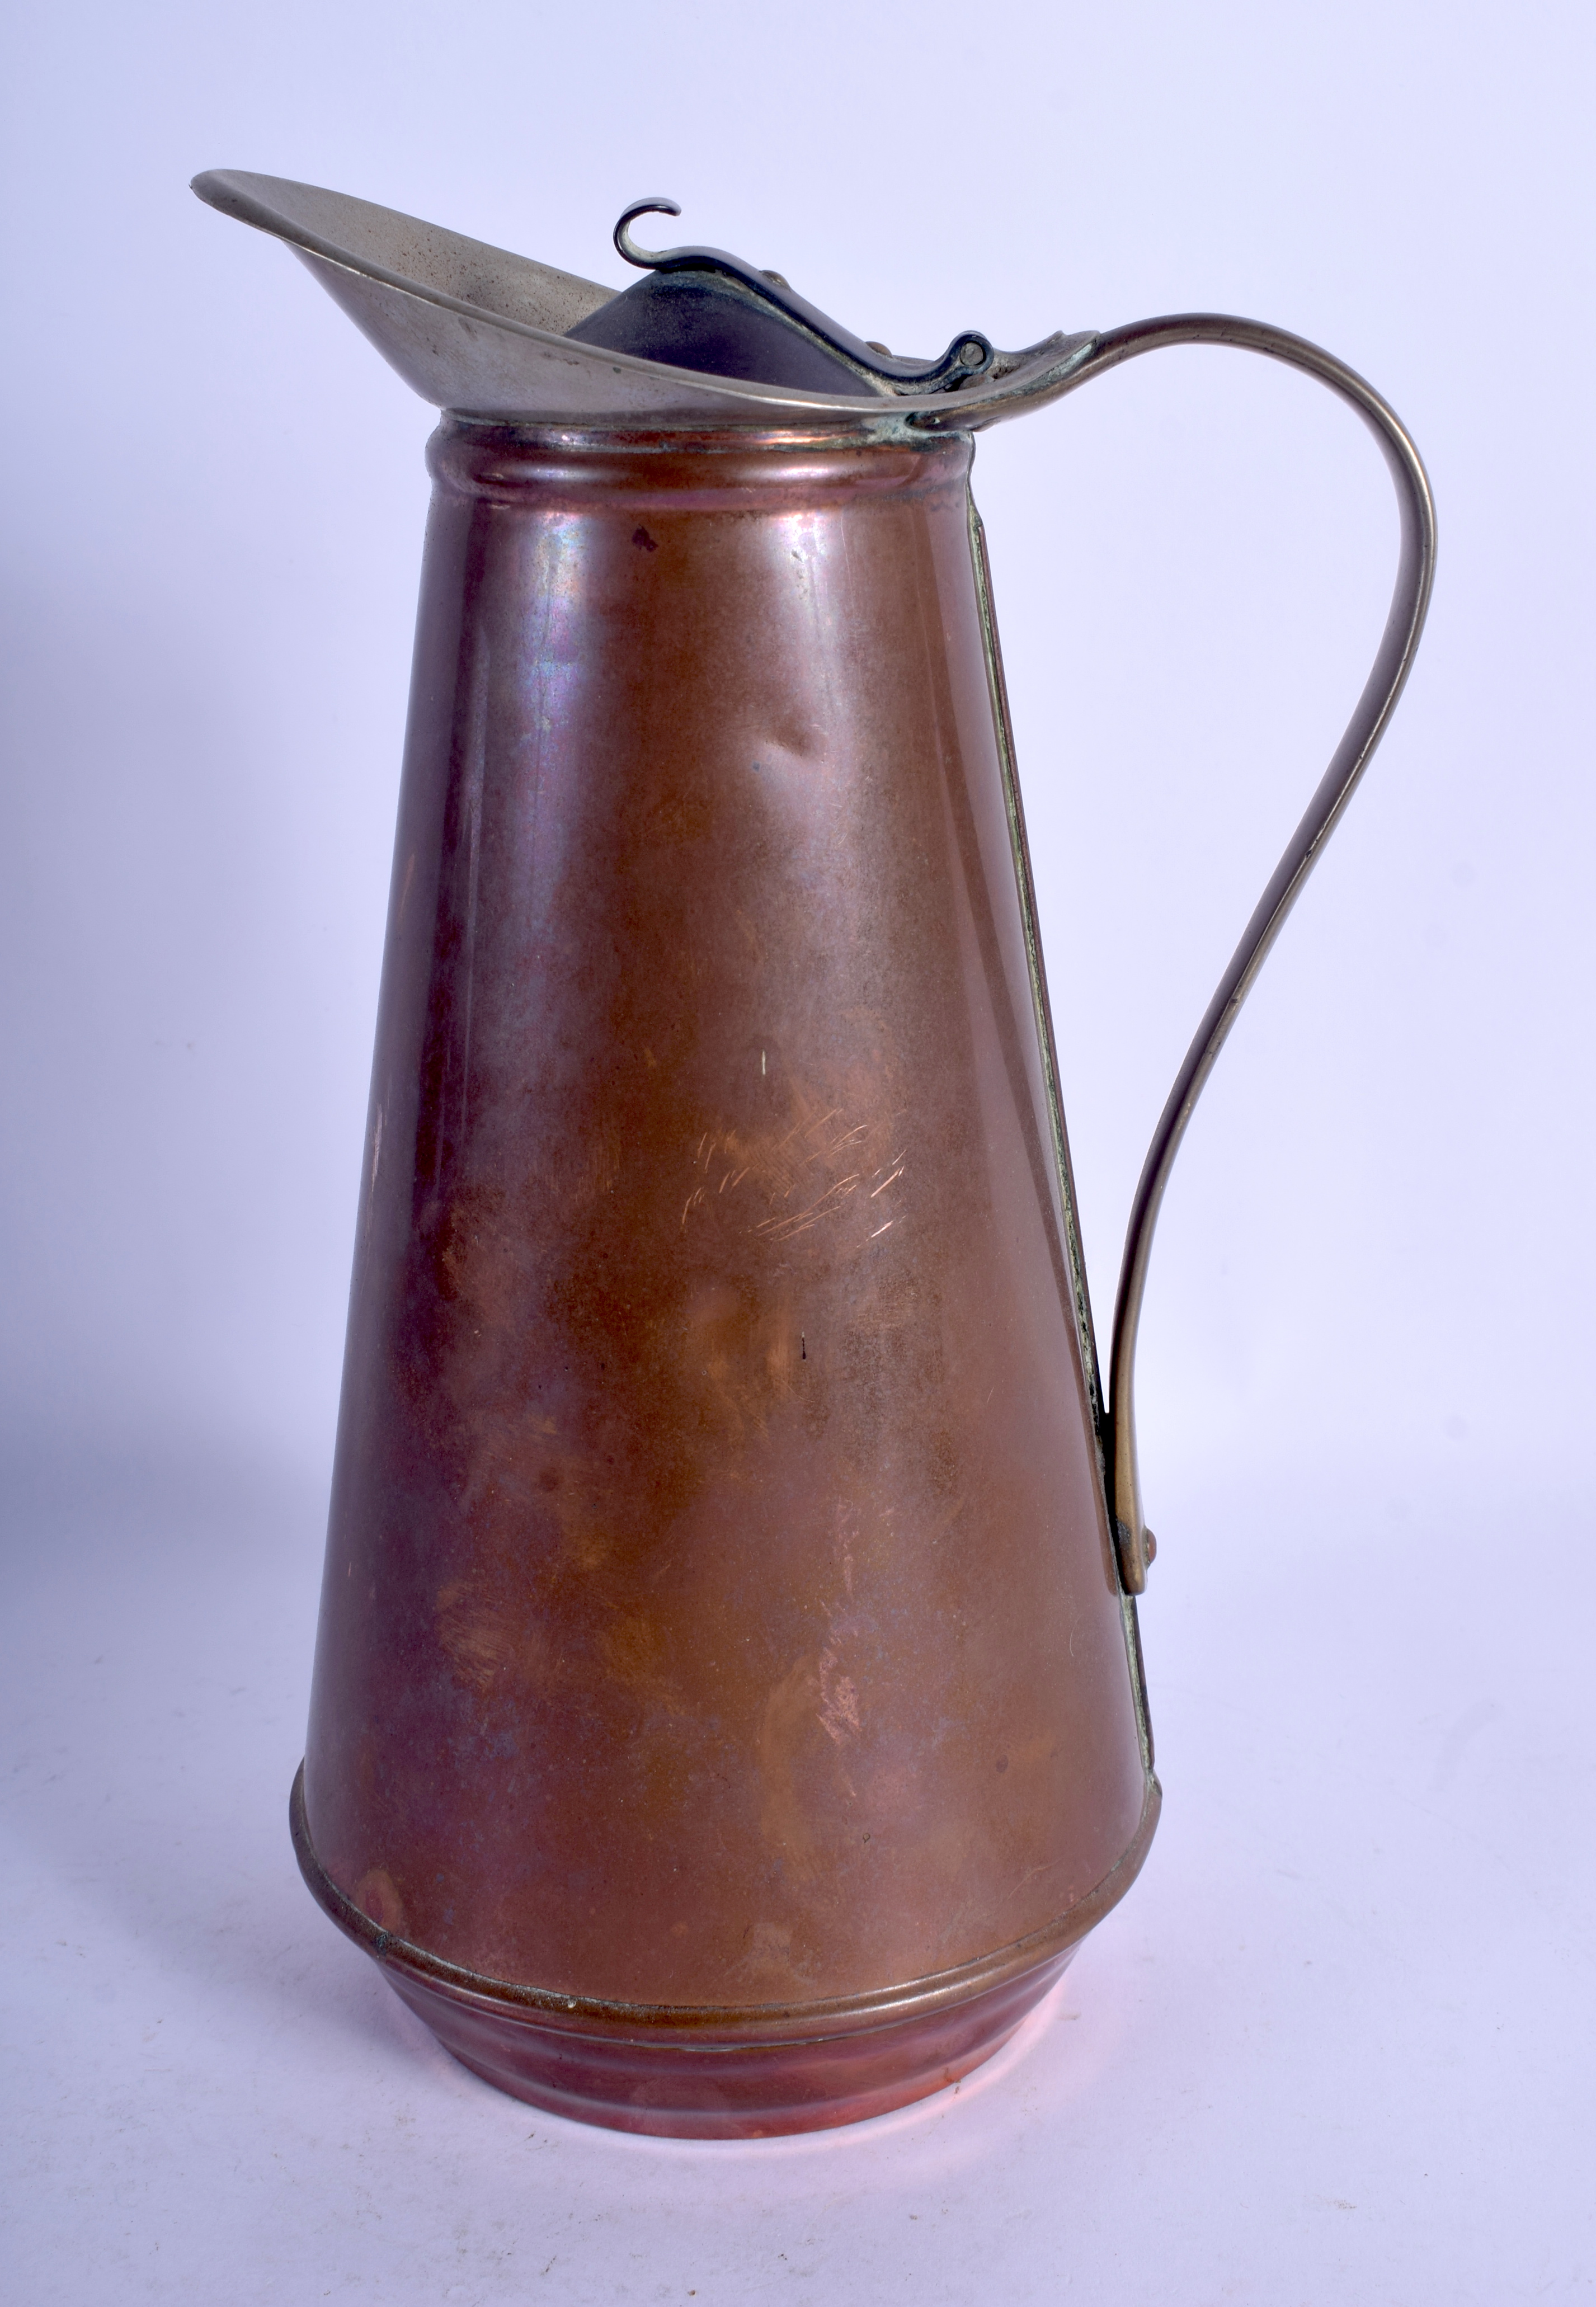 AN ARTS AND CRAFTS WAS BENSON COPPER EWER. 25 cm high.